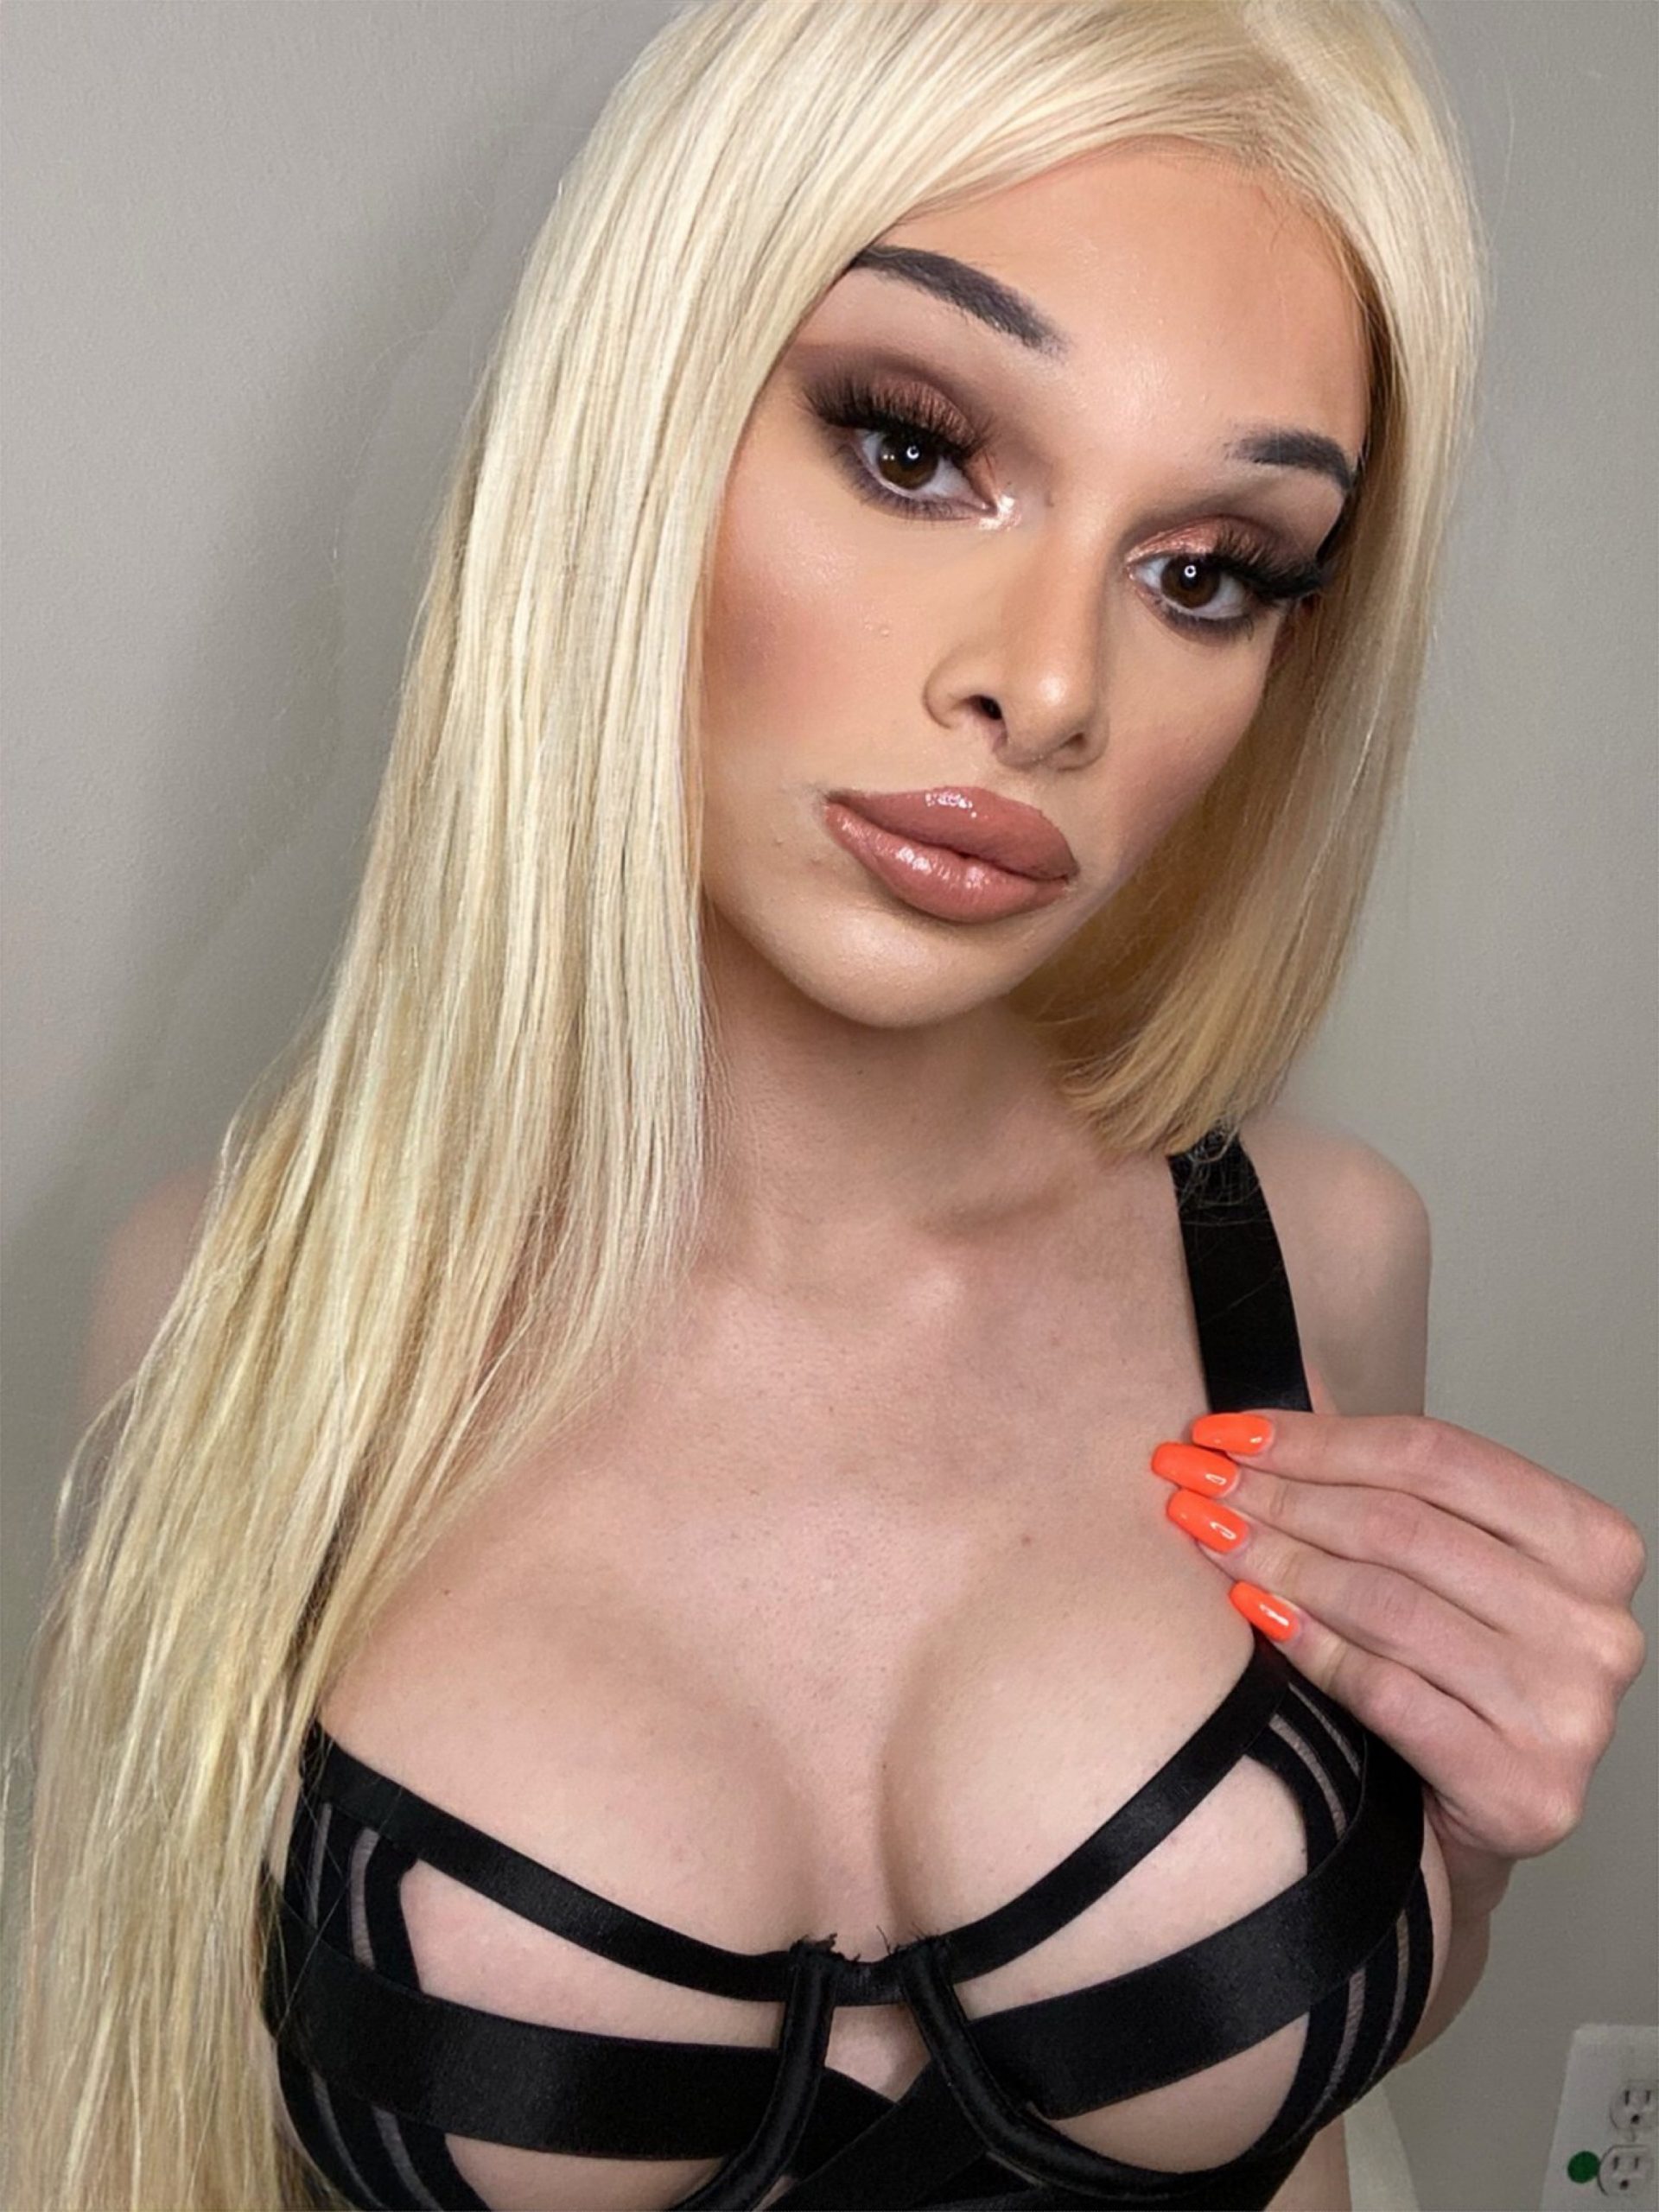 You are currently viewing avenaxo Onlyfans Model from